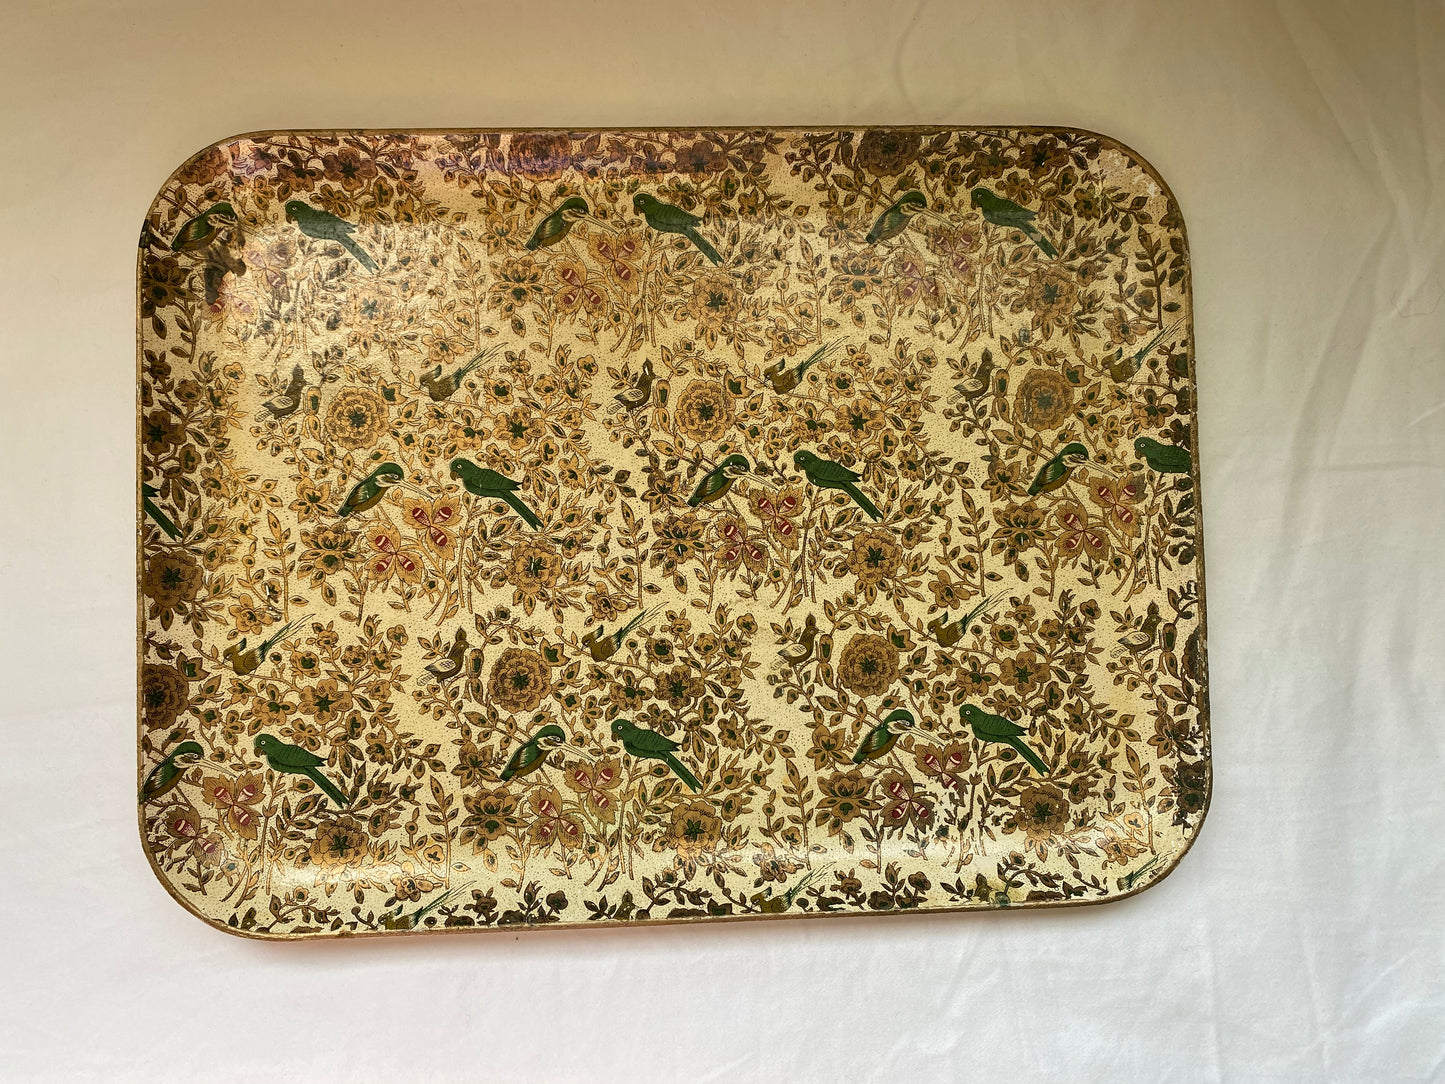 Cream Tray with Gold Florals & Green Birds